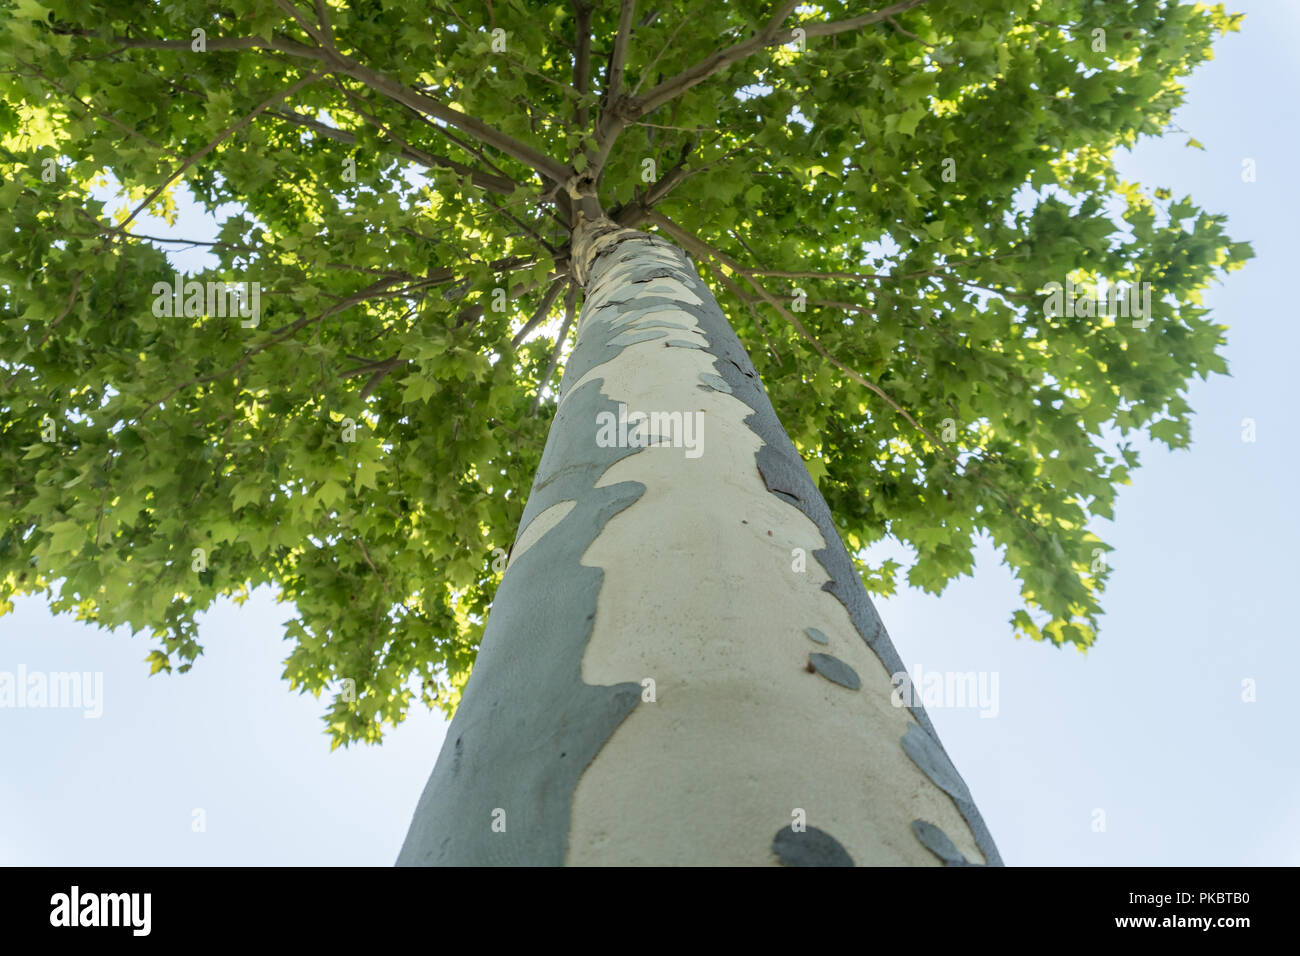 High Plane tree with green leaves View from bottom. Stock Photo